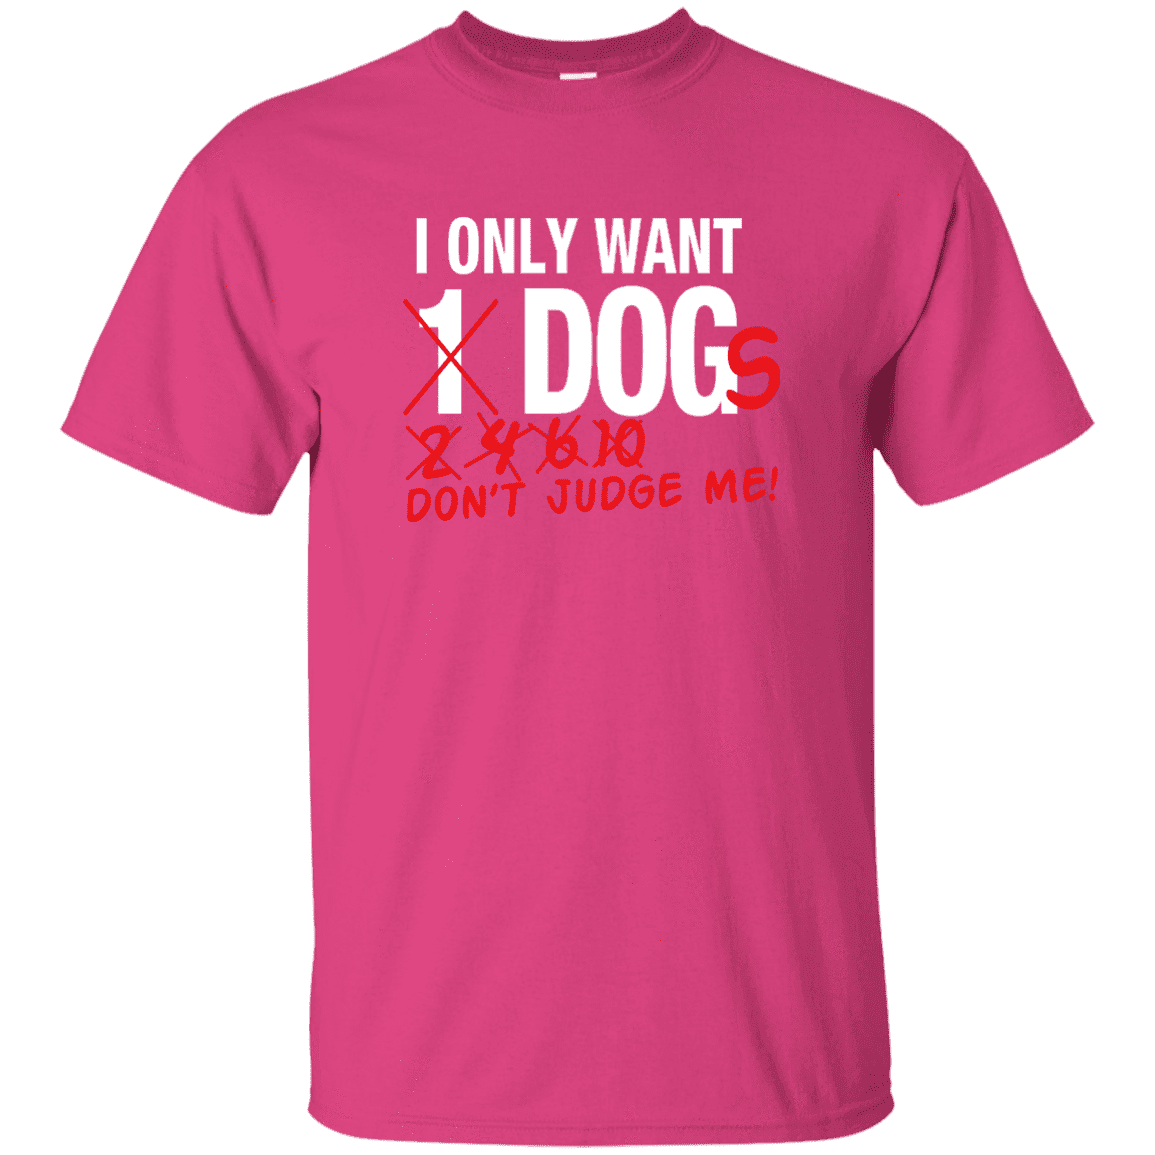 I Only Want 1 Dog - T Shirt.